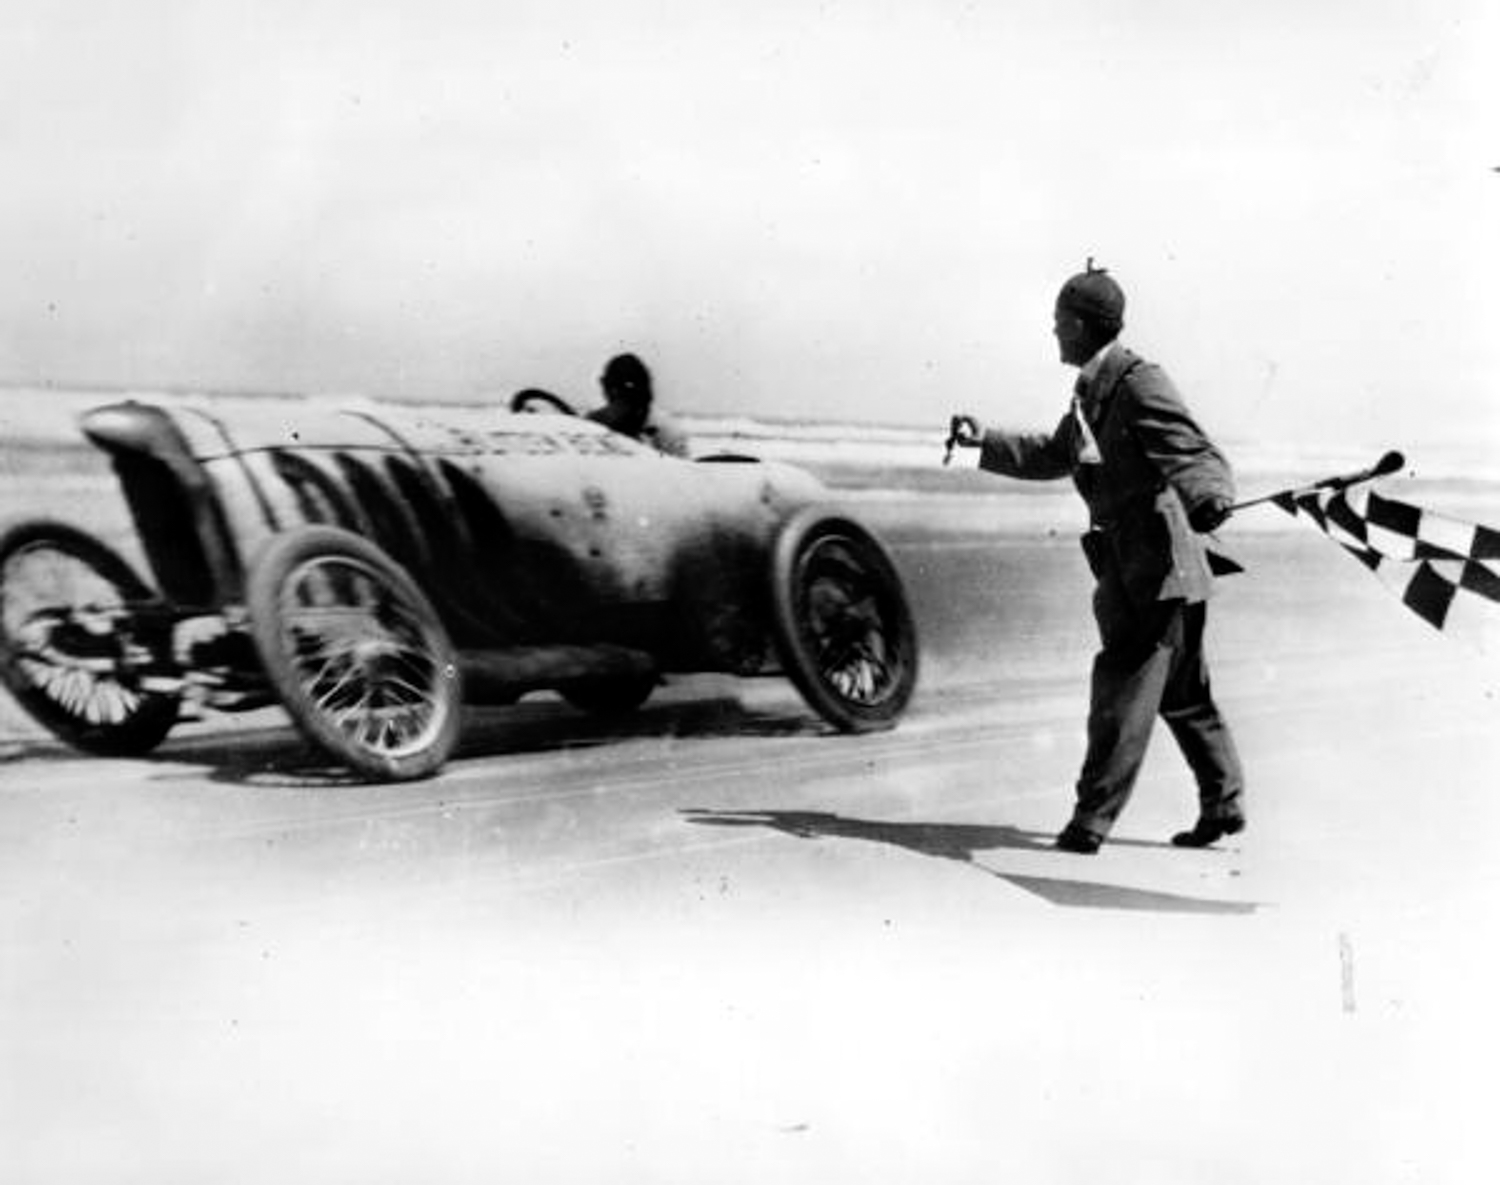 With the Blitzen Benz, Oldfield set a new land speed record on the beach at Daytona of 131.7 mph. 